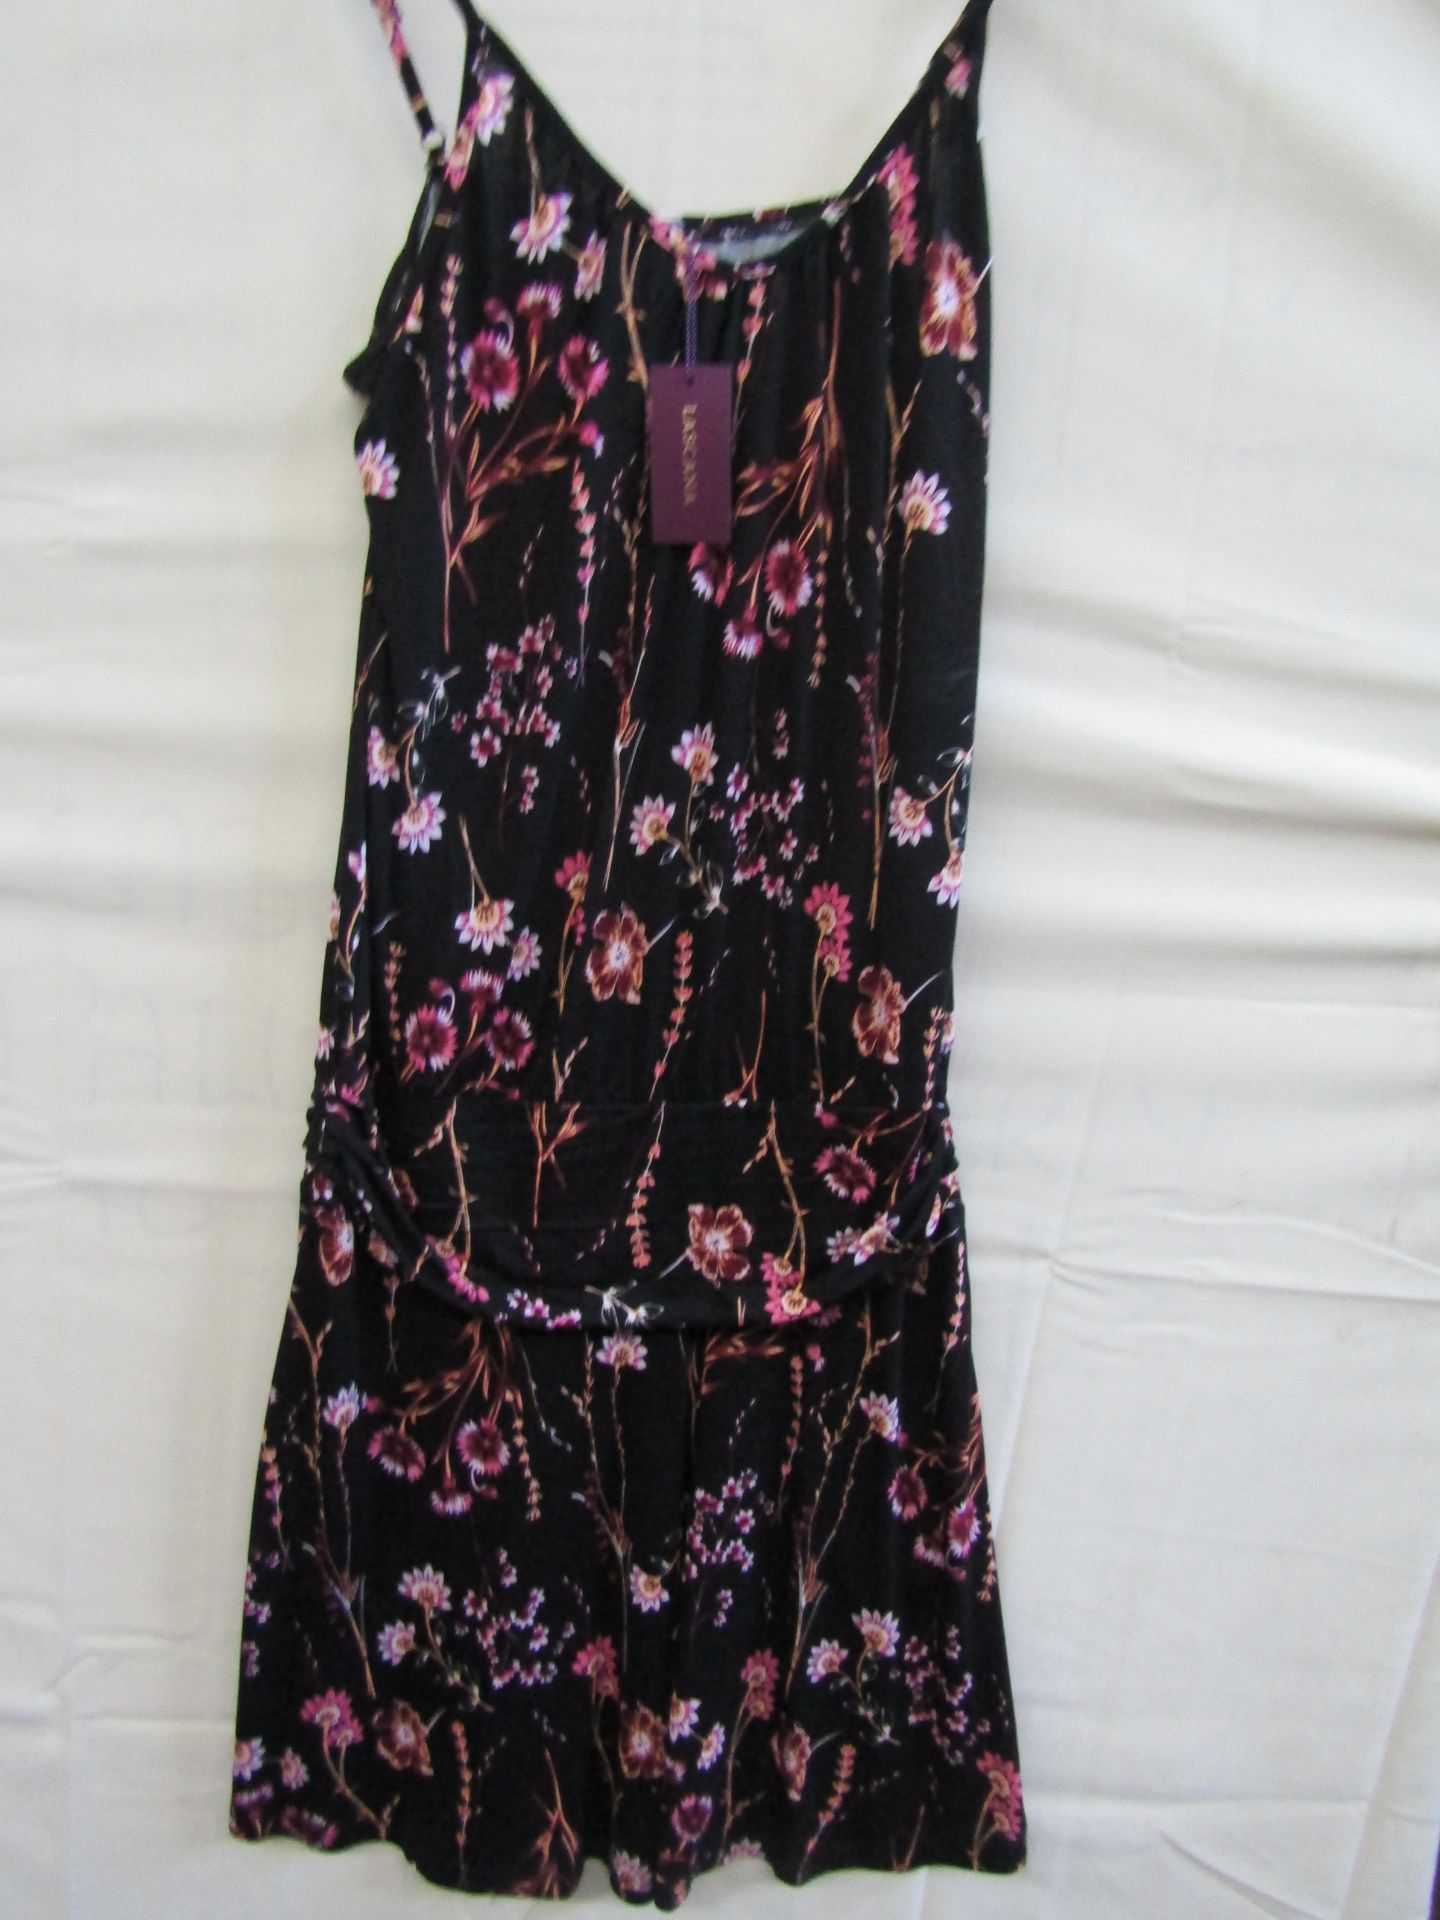 Lascana Dress With Pulled In Waist Size 40 ( May Have Been Worn ) Has Tags Attatched